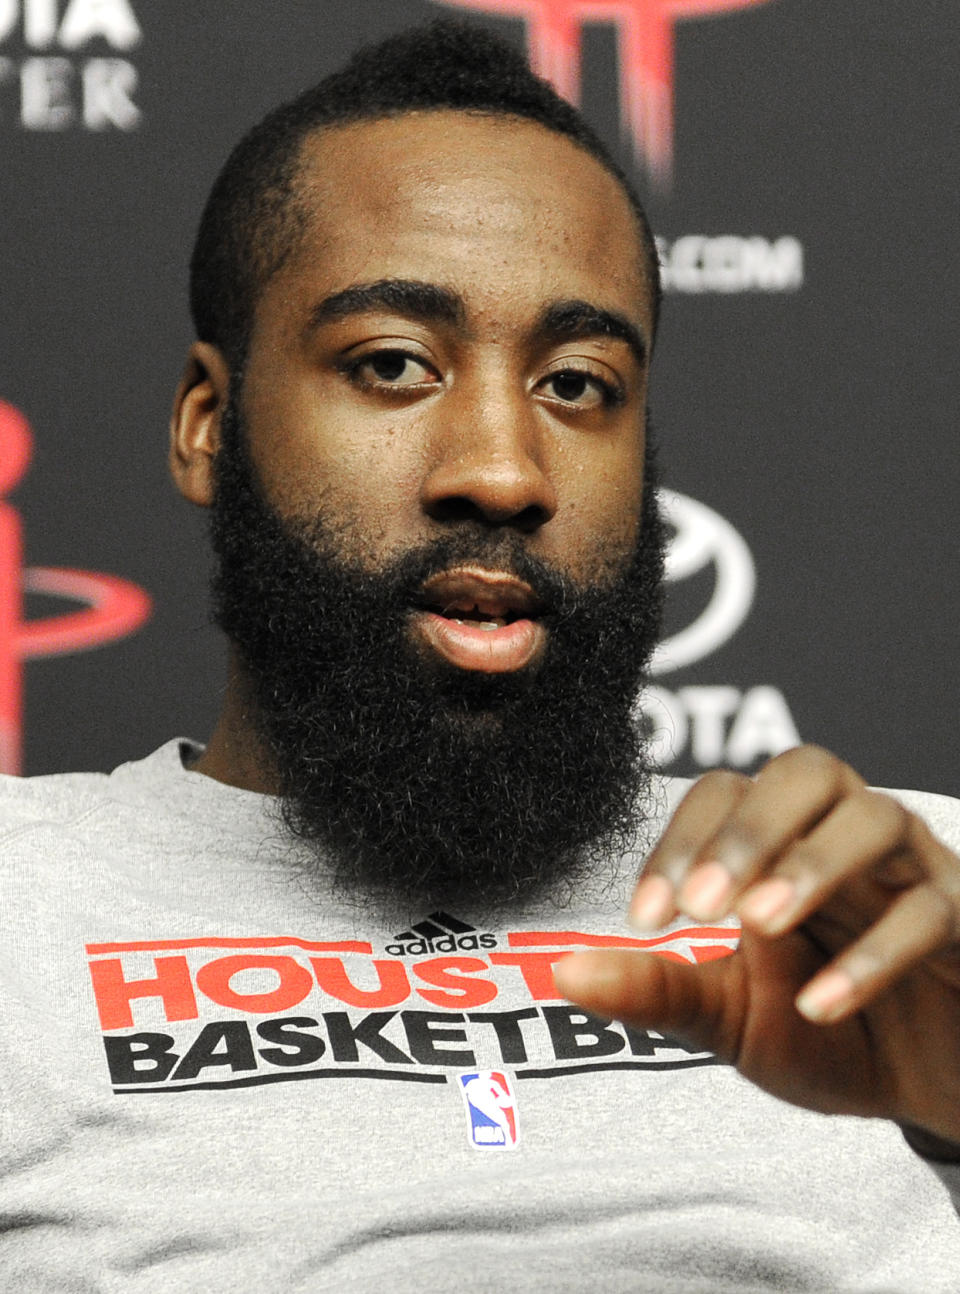 Houston Rockets' James Harden talks about his favorite Houston restaurants Monday, Feb. 4, 2013, in Houston. The 23-year-old will make his NBA All-Star debut when the game and its weekend of festivities comes to Houston Feb. 15-17. (AP Photo/Pat Sullivan)In this photo taken Monday, Feb. 4, 2013, Houston Rockets basketball player James Harden talks about his favorite Houston restaurants during an interview in Houston. The 23-year-old will make his NBA All-Star debut when the game and its weekend of festivities comes to Houston Feb. 15-17. (AP Photo/Pat Sullivan)